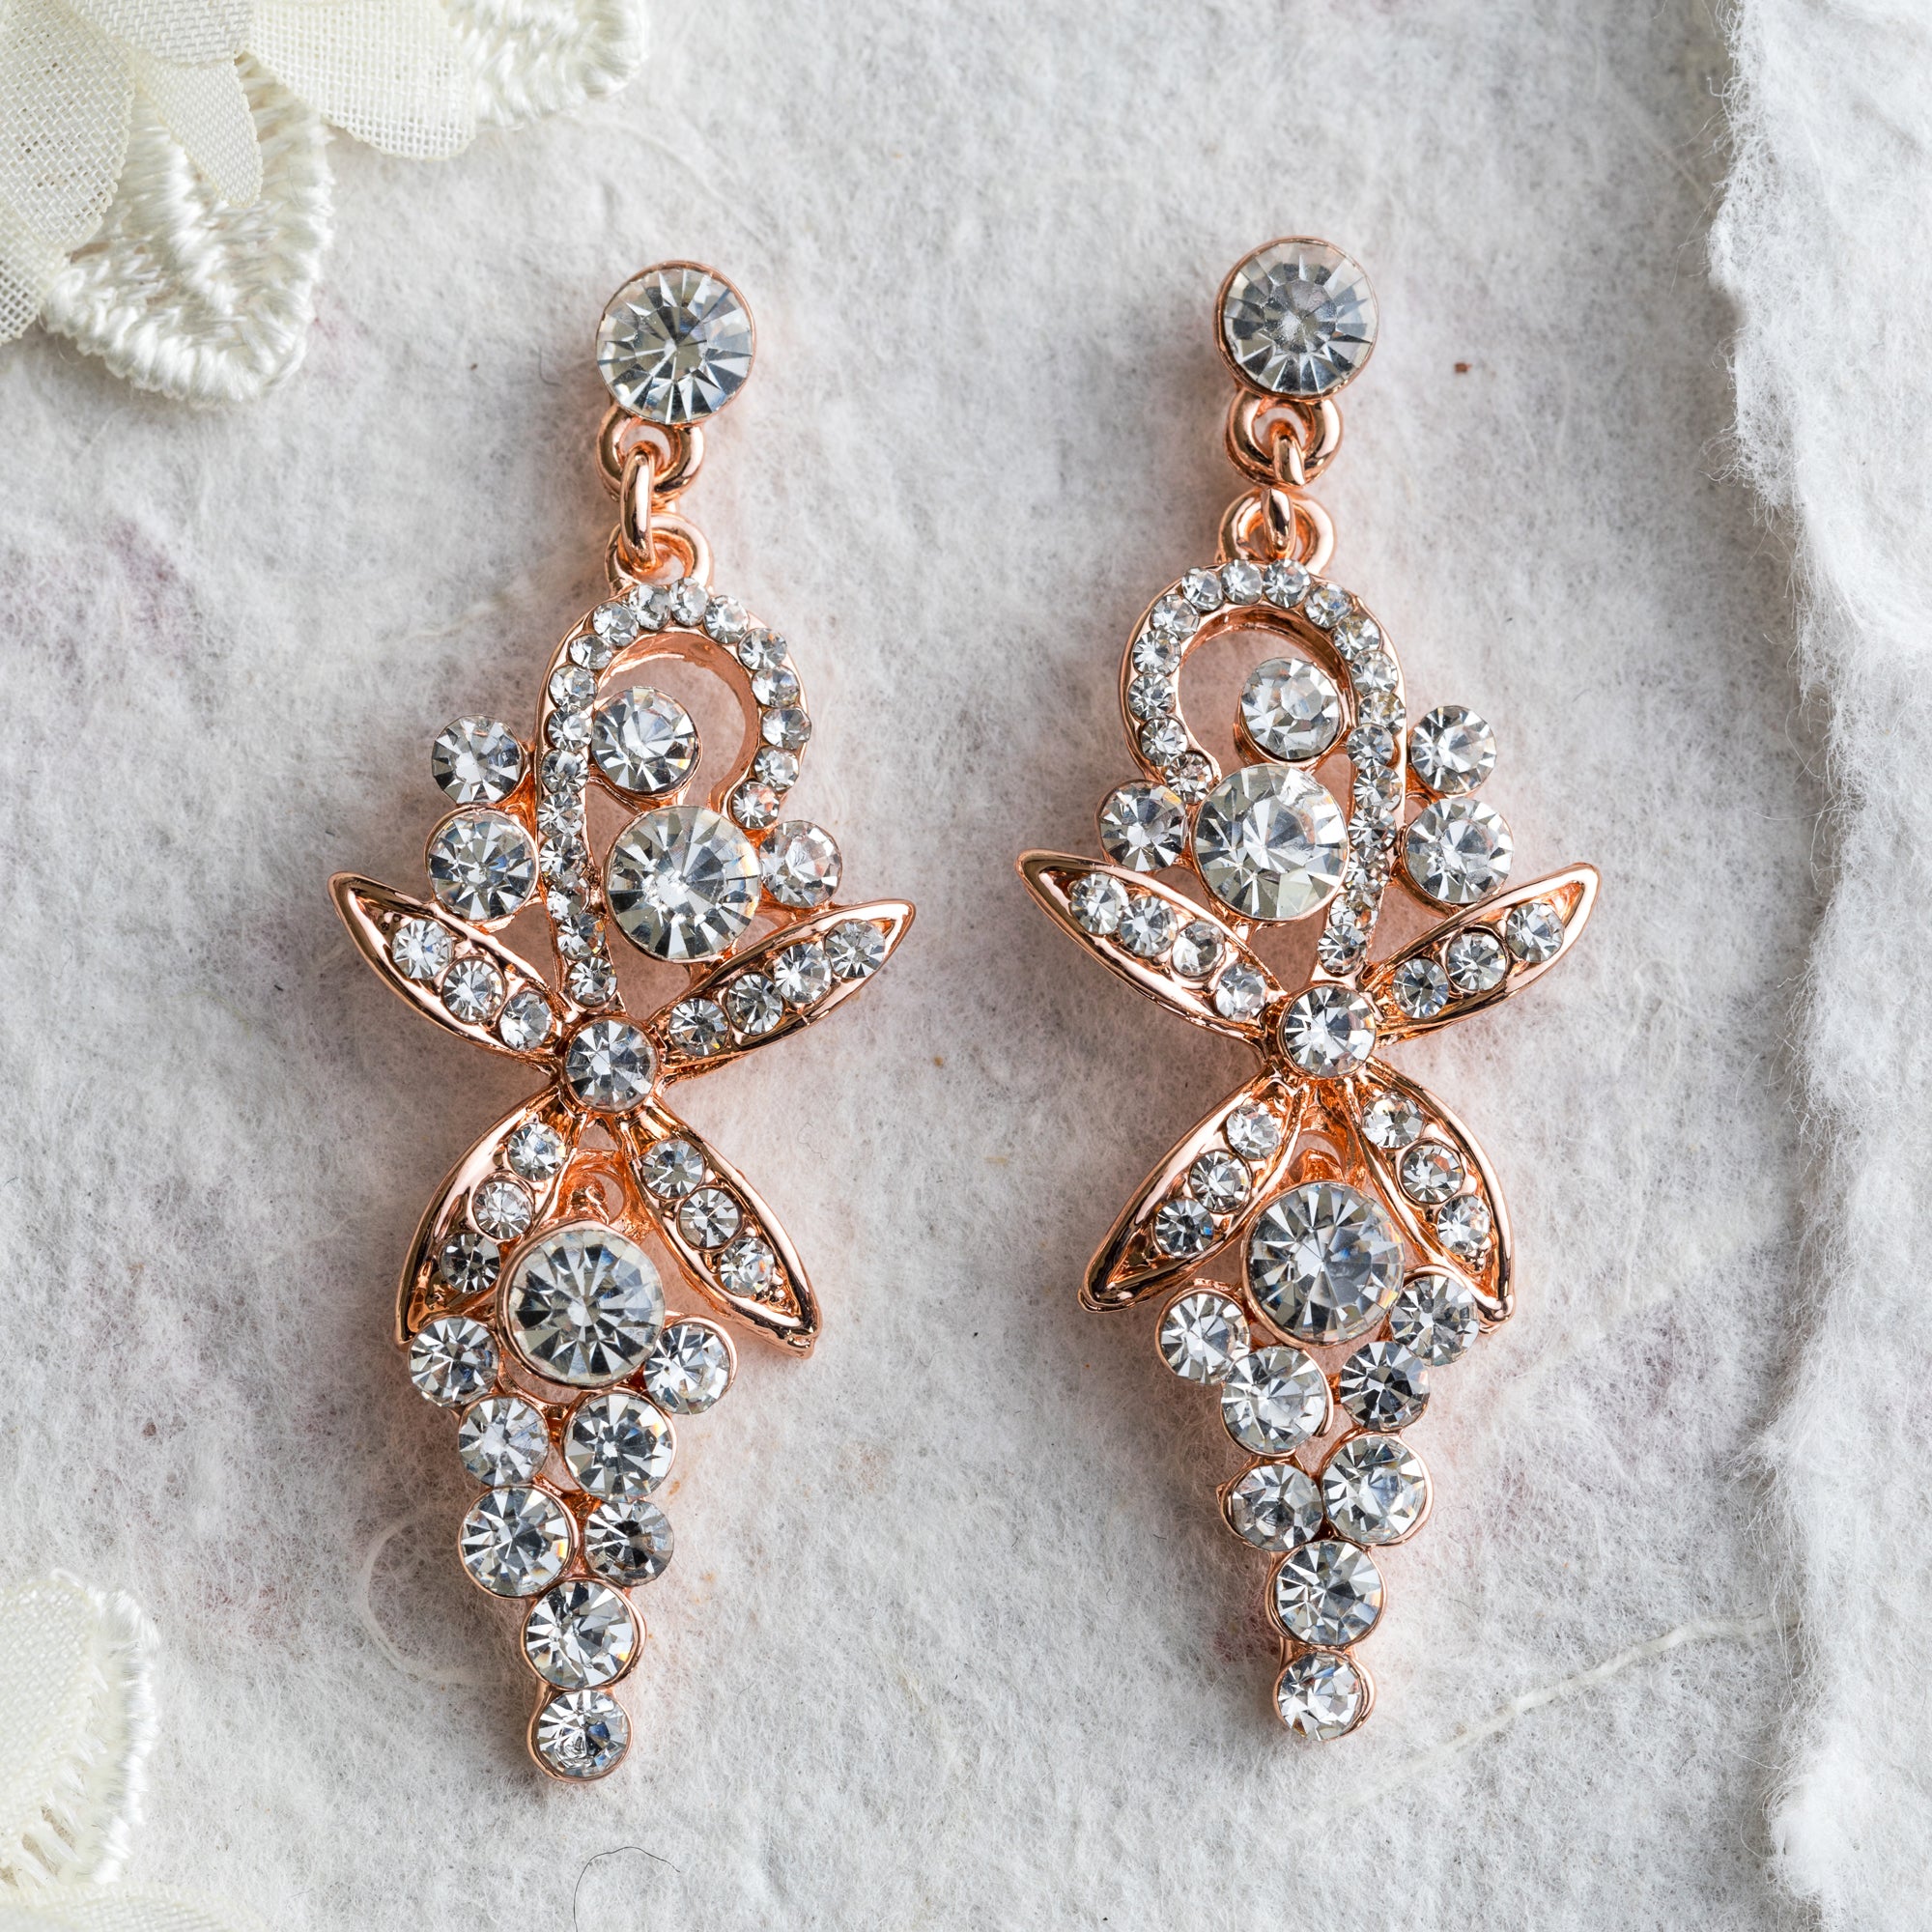 Elle crystal and rose gold earrings